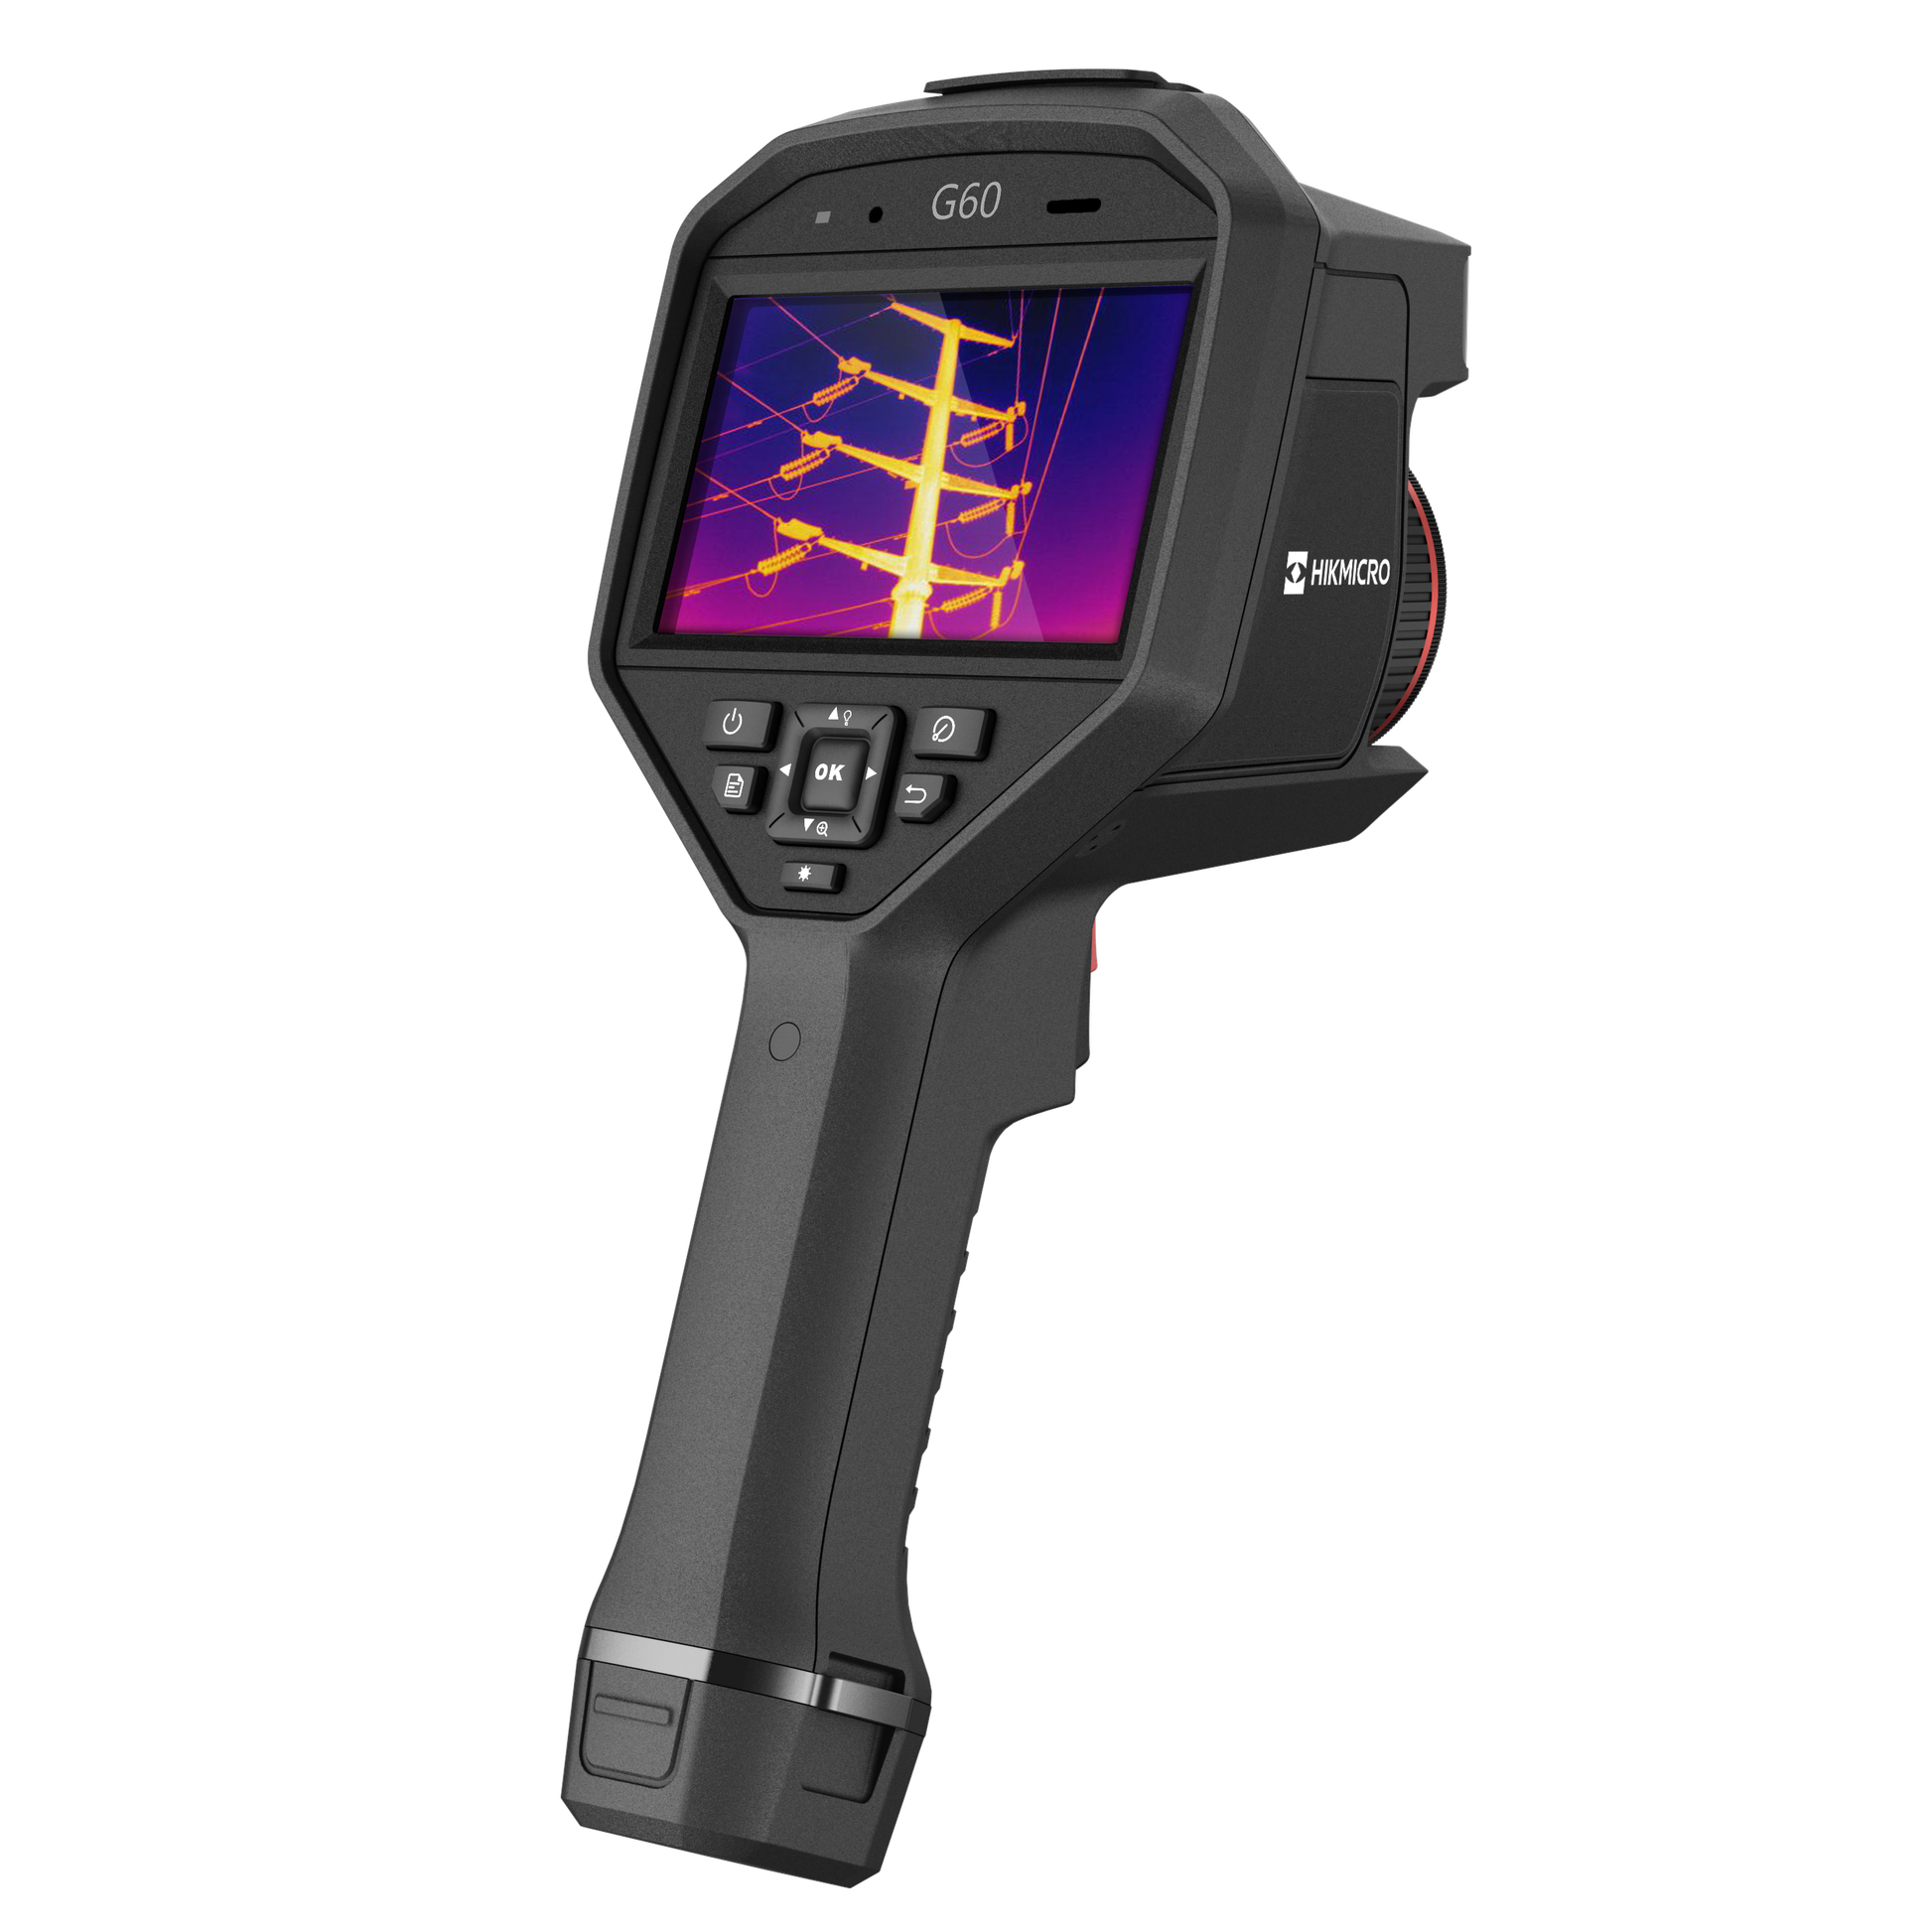 HikMicro G60 Right Side View - Hikvision Handheld Thermal Camera Cape Thermal